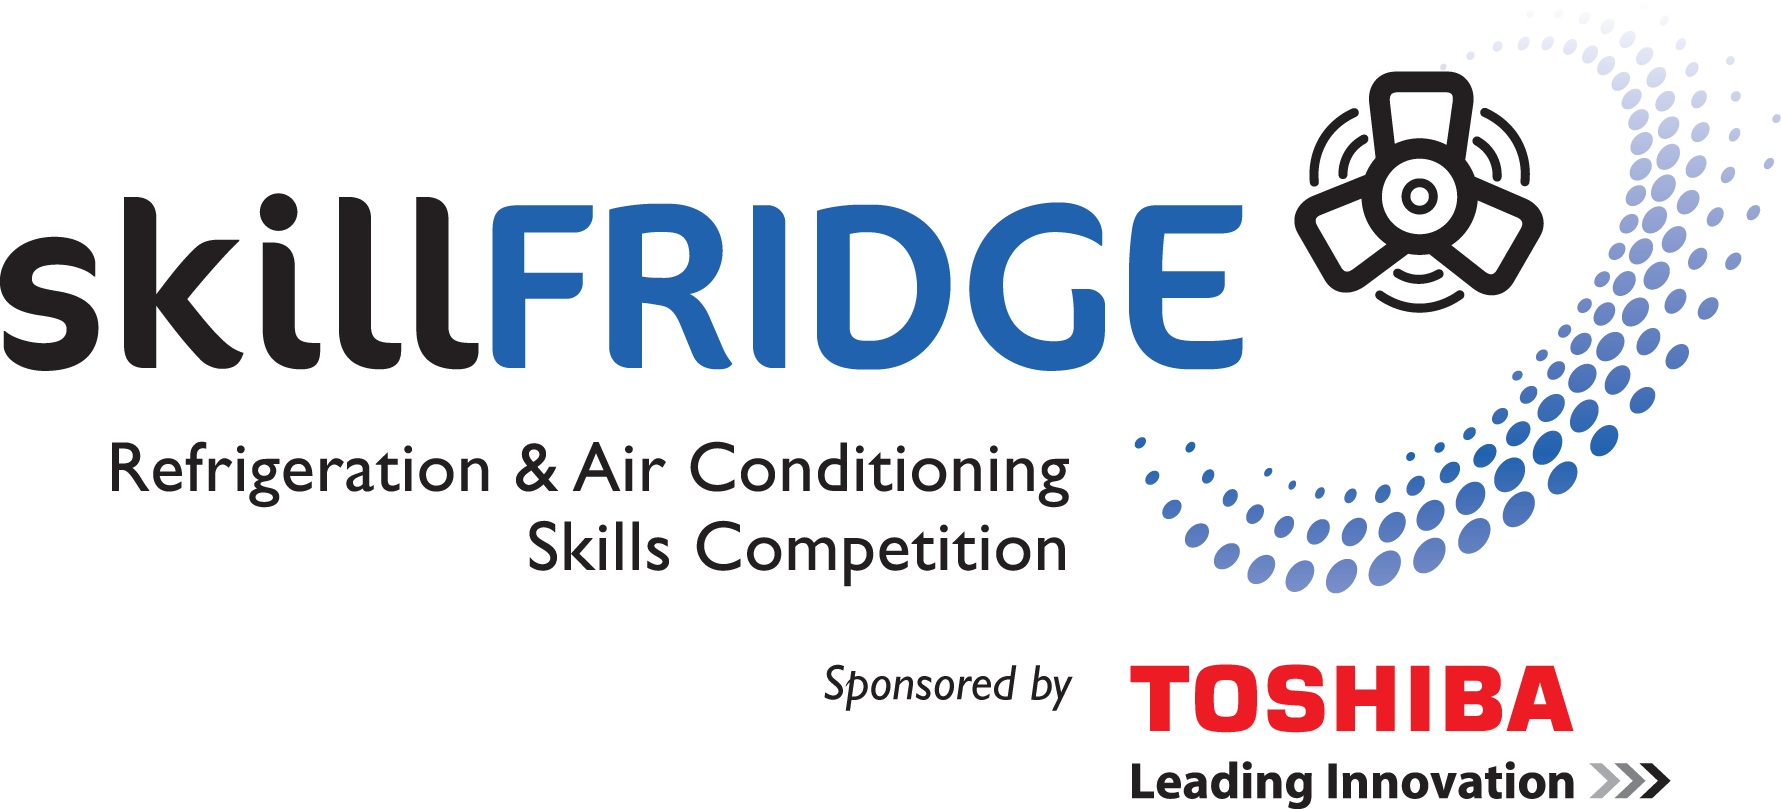 SkillFRIDGE competitors set their sights on the final